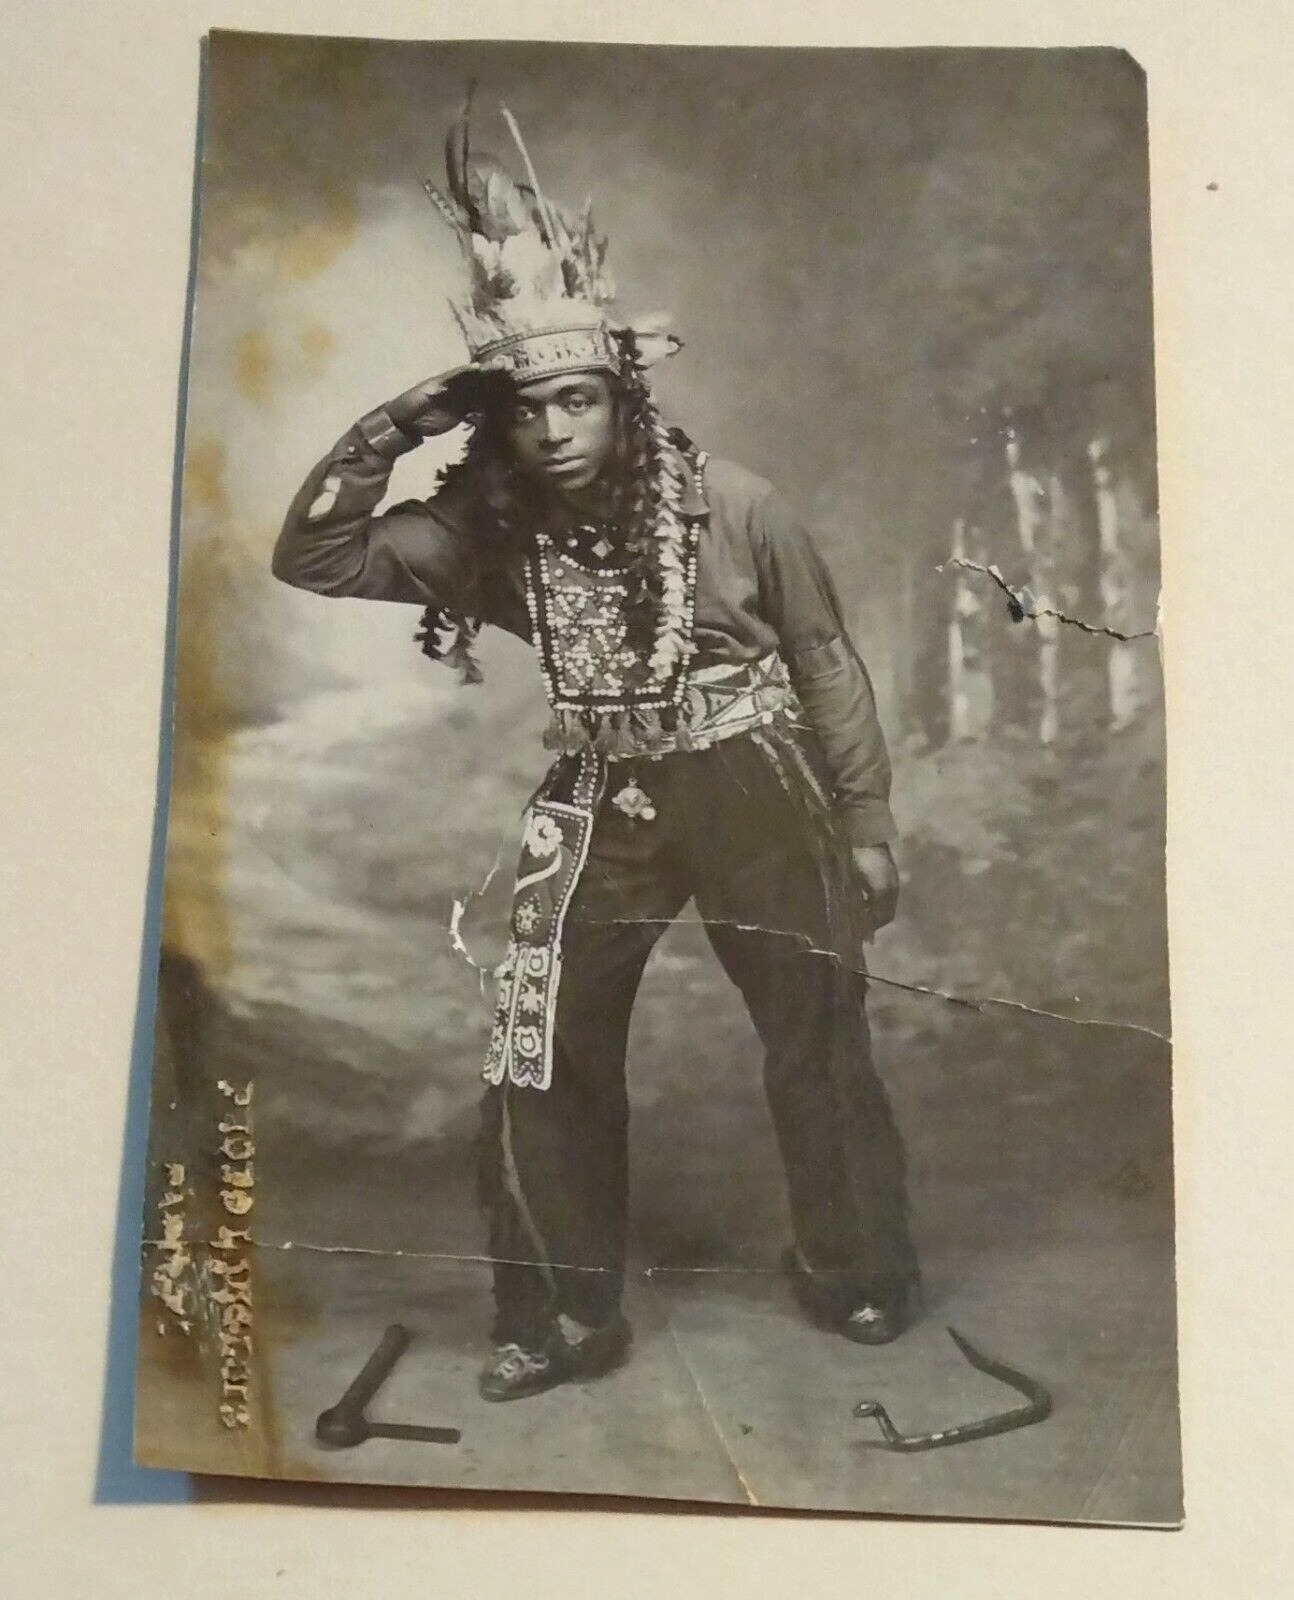 Old Real Photo Post Card ~ Black Man Dressed as Native American - Studio Photo